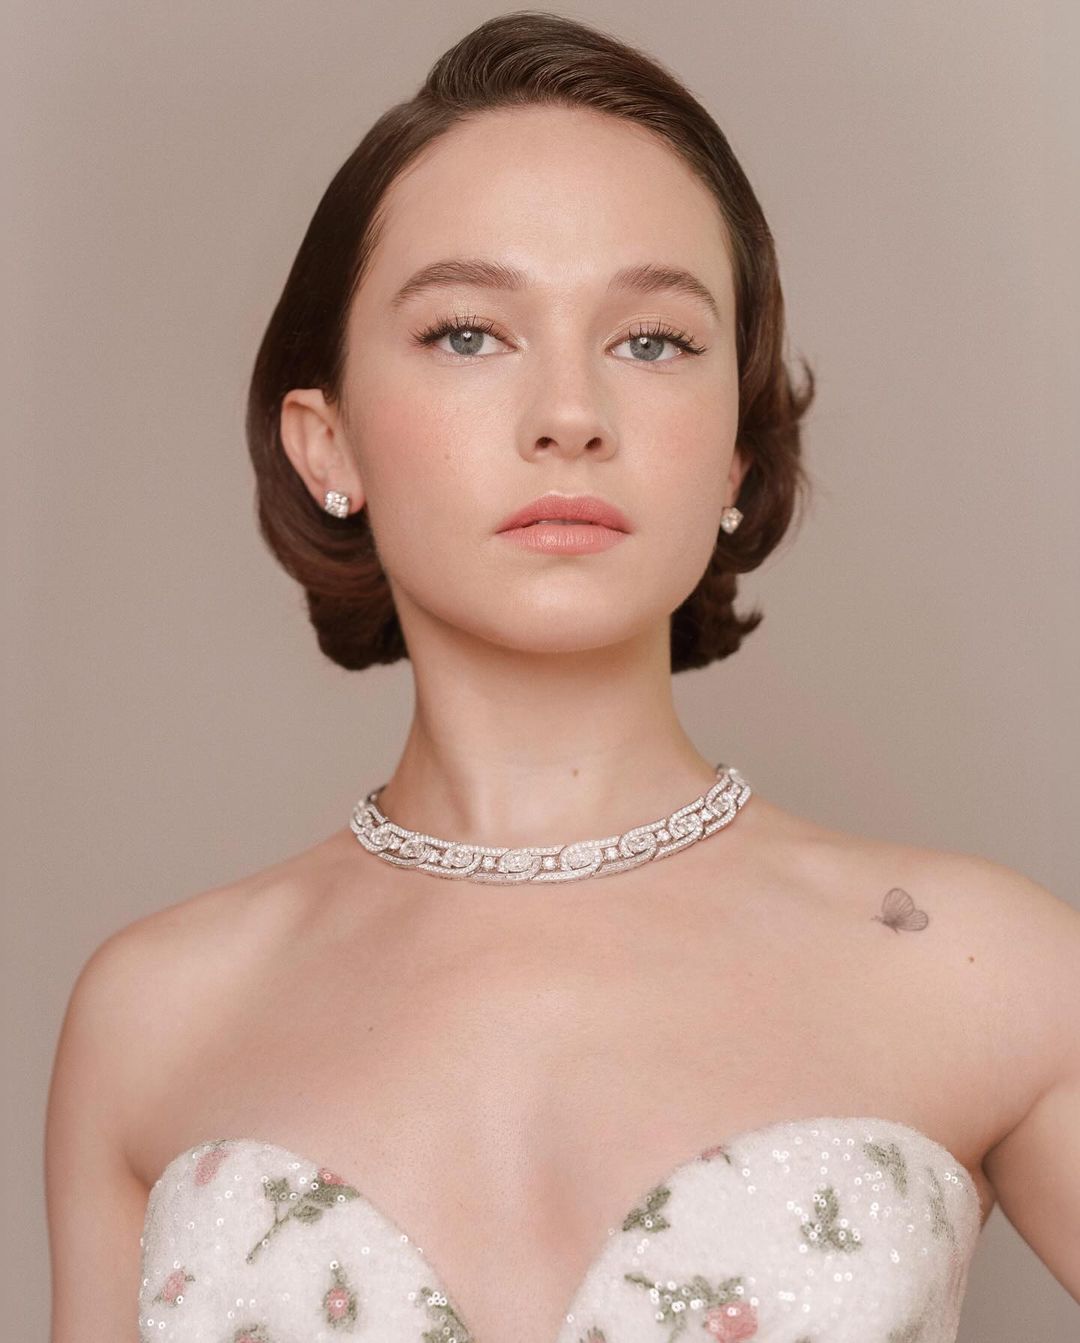 Cailee Spaeny at the 81st Golden Globes